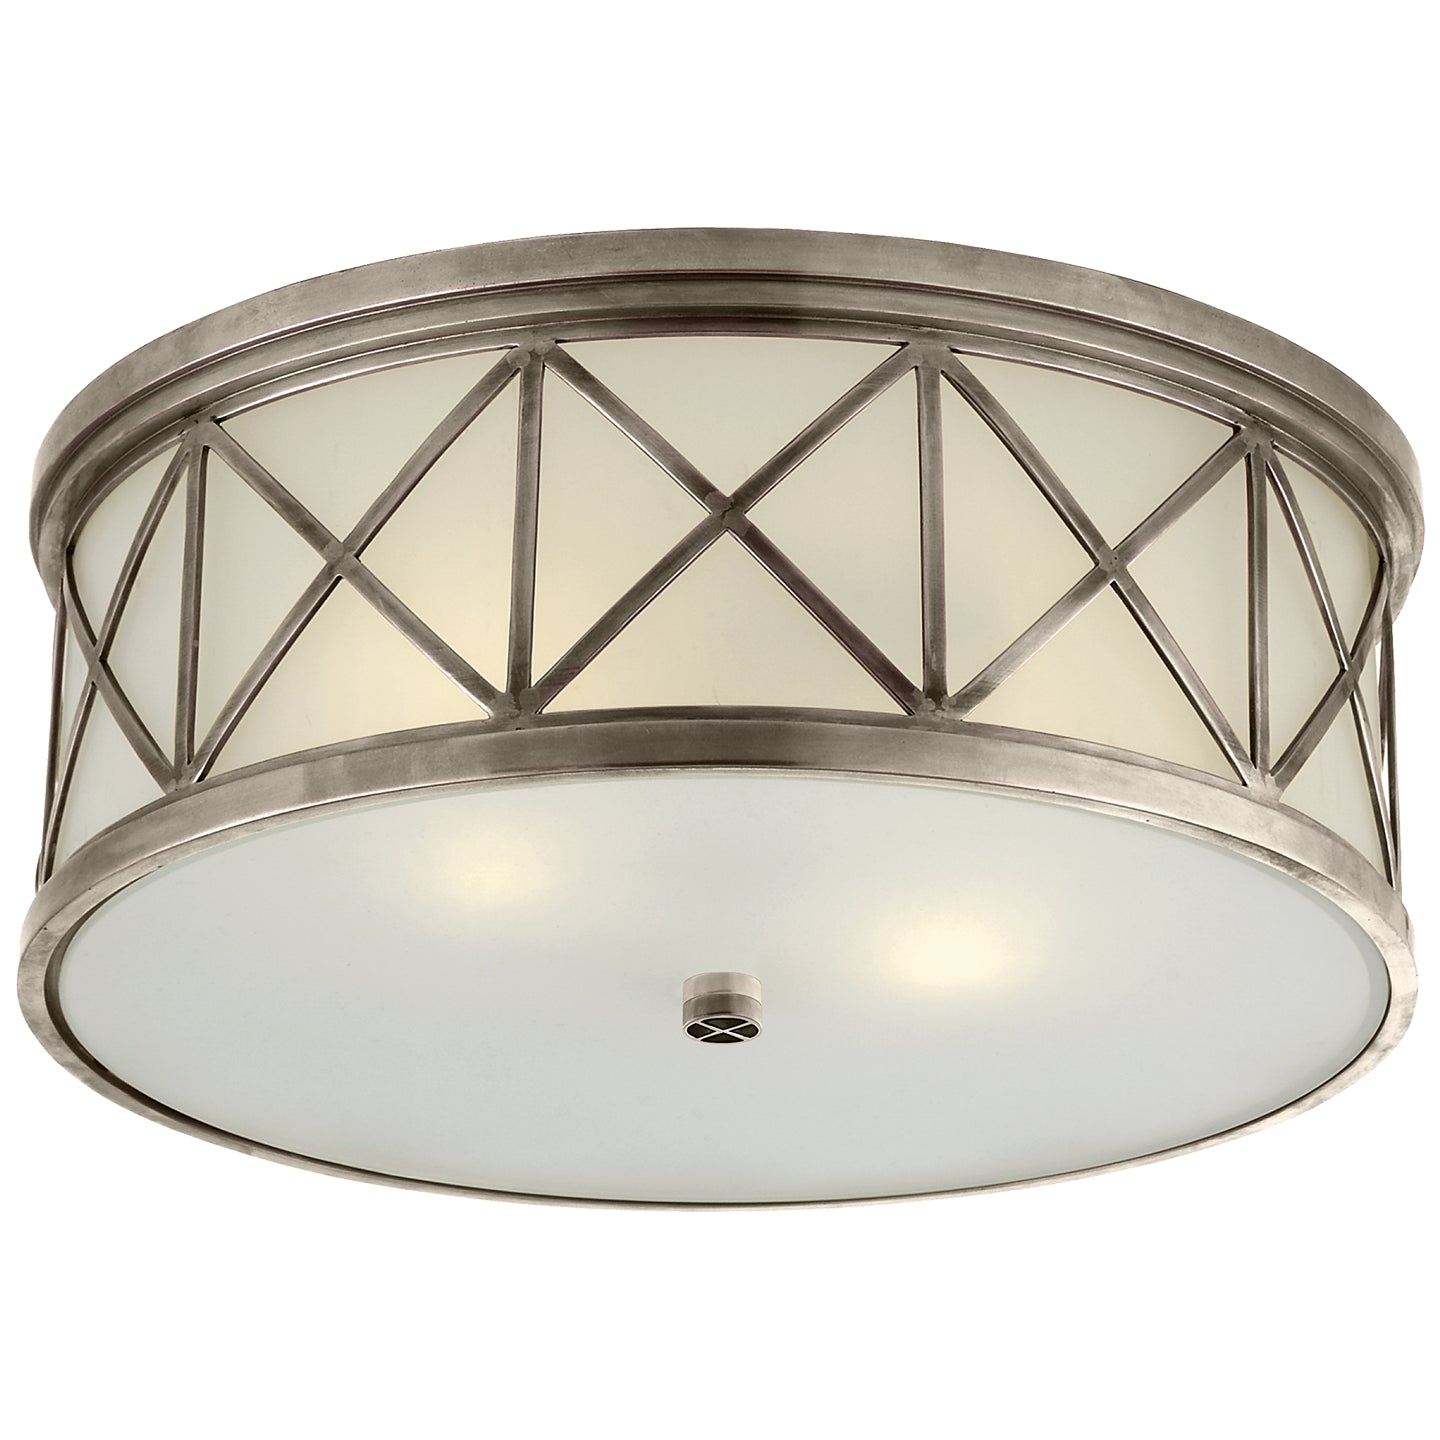 Load image into Gallery viewer, Visual Comfort Signature - SK 4011AN-FG - Three Light Flush Mount - Montpelier - Antique Nickel
